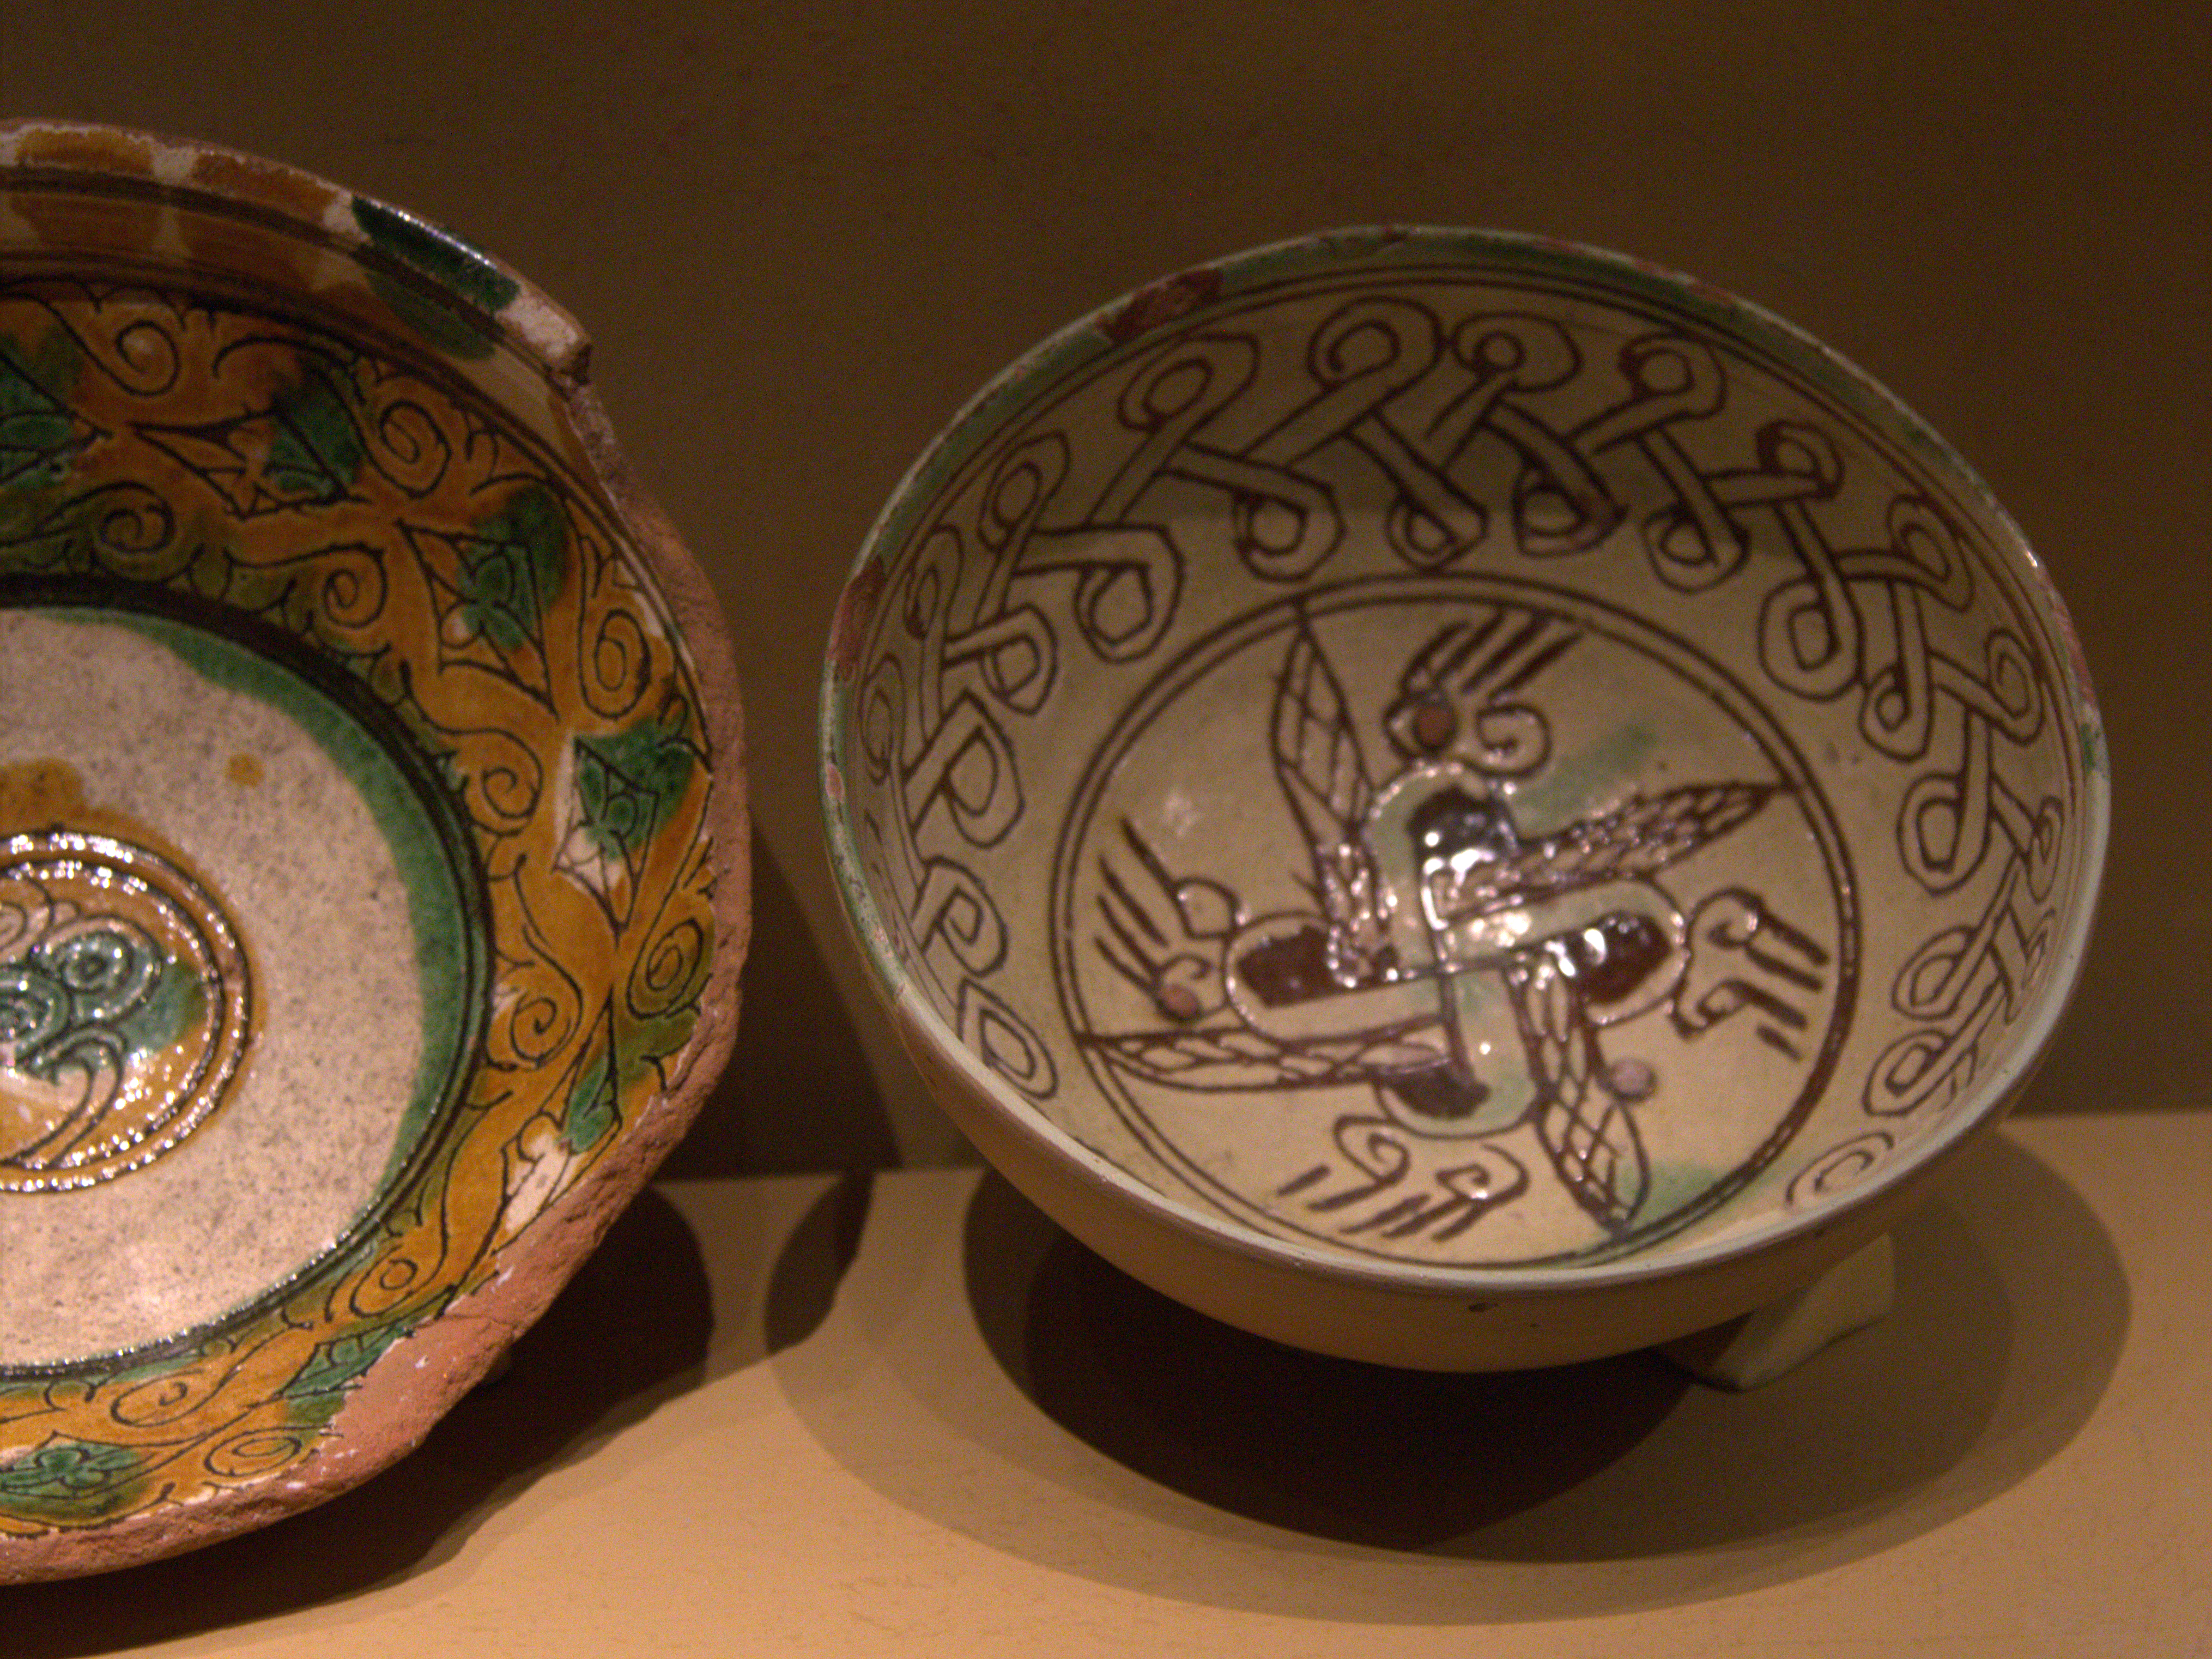 File:Glazes ceramics, sgraffito and painted decoration, 12th